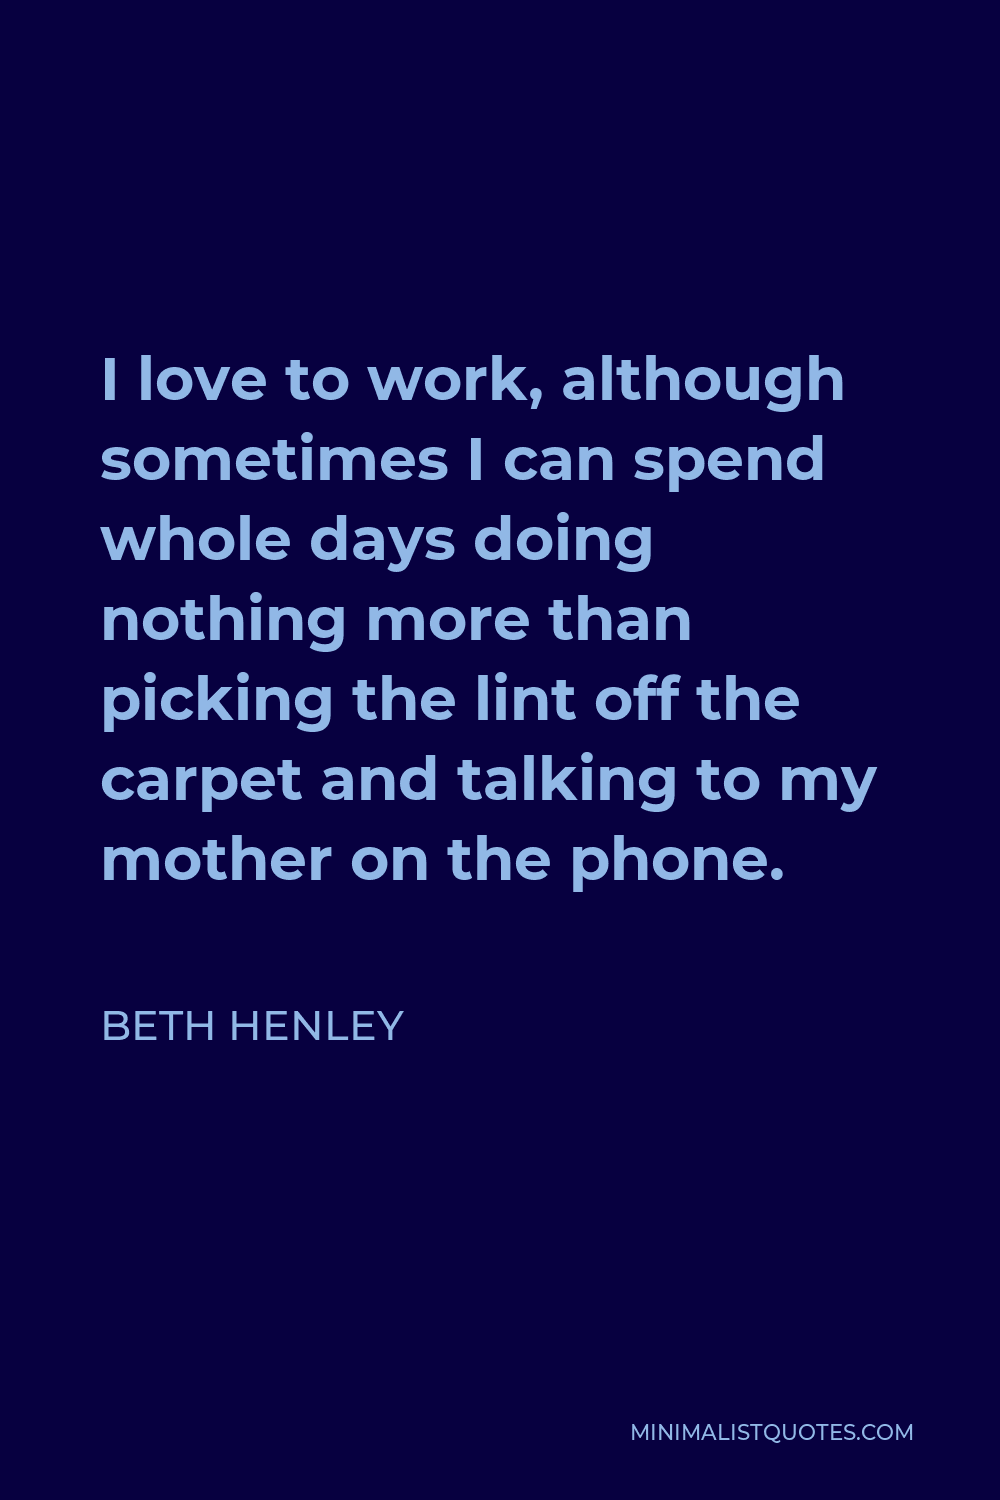 Beth Henley Quote - I love to work, although sometimes I can spend whole days doing nothing more than picking the lint off the carpet and talking to my mother on the phone.